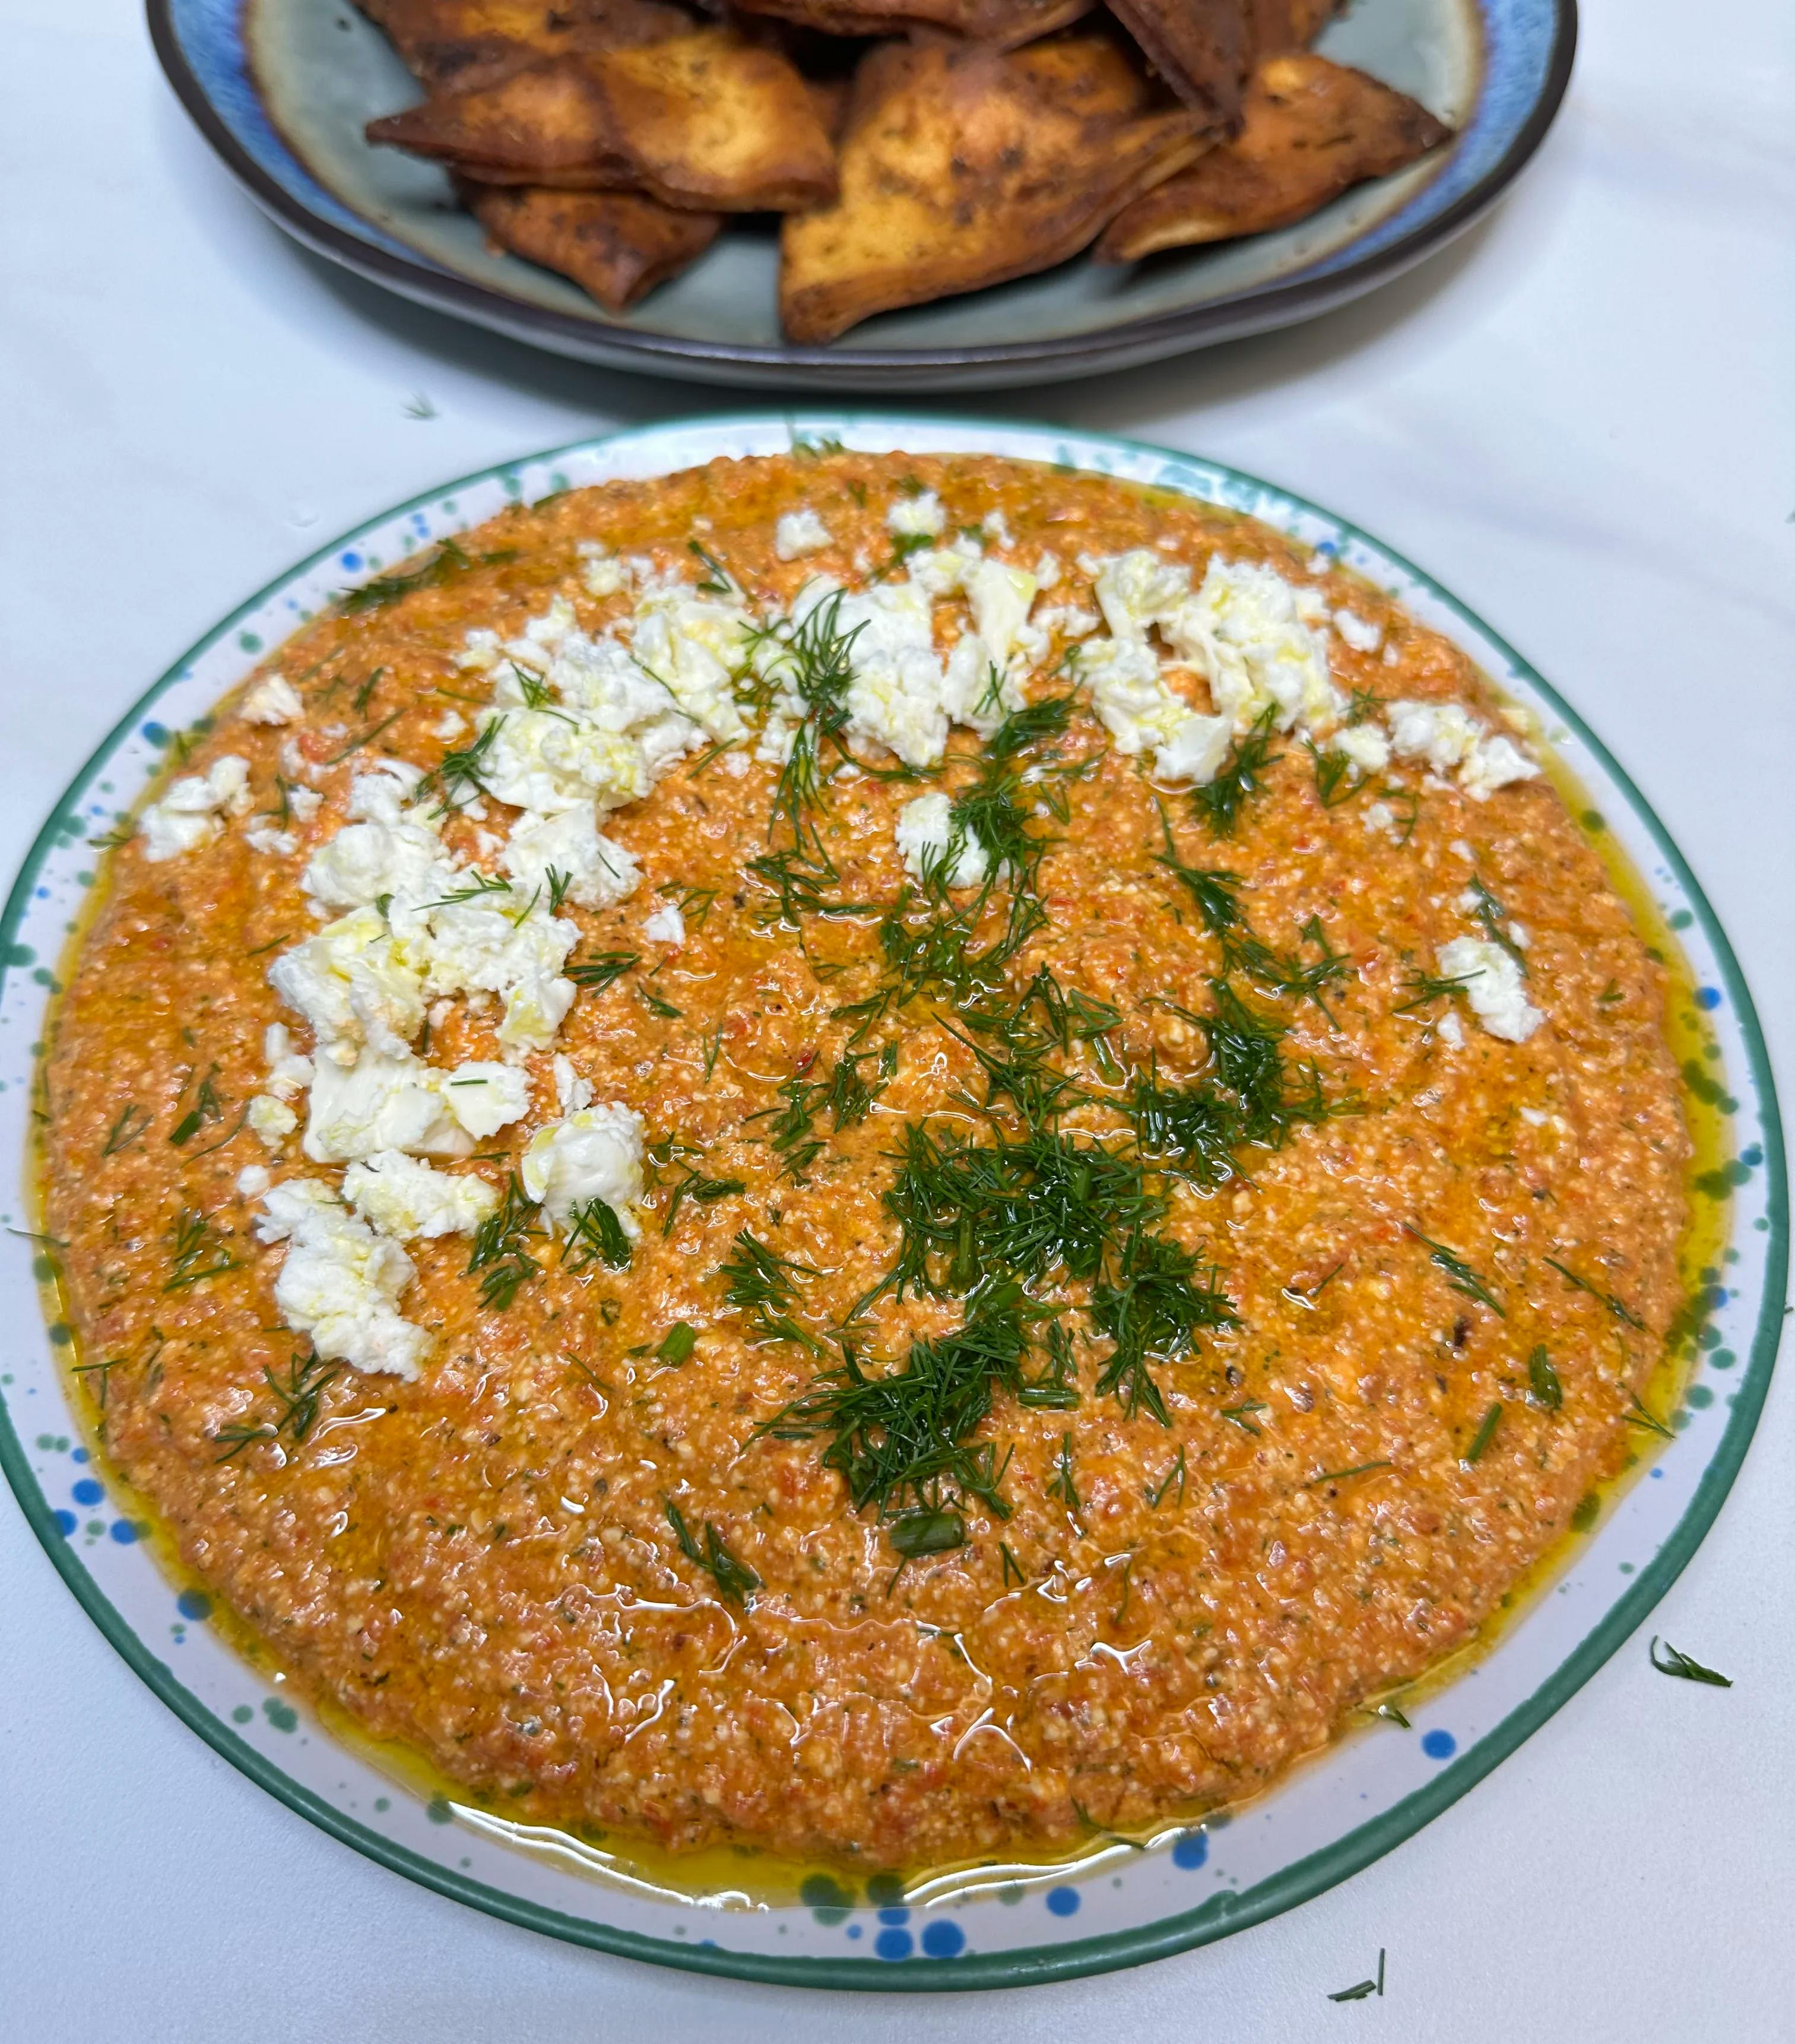 Picture for Spicy Feta Dip